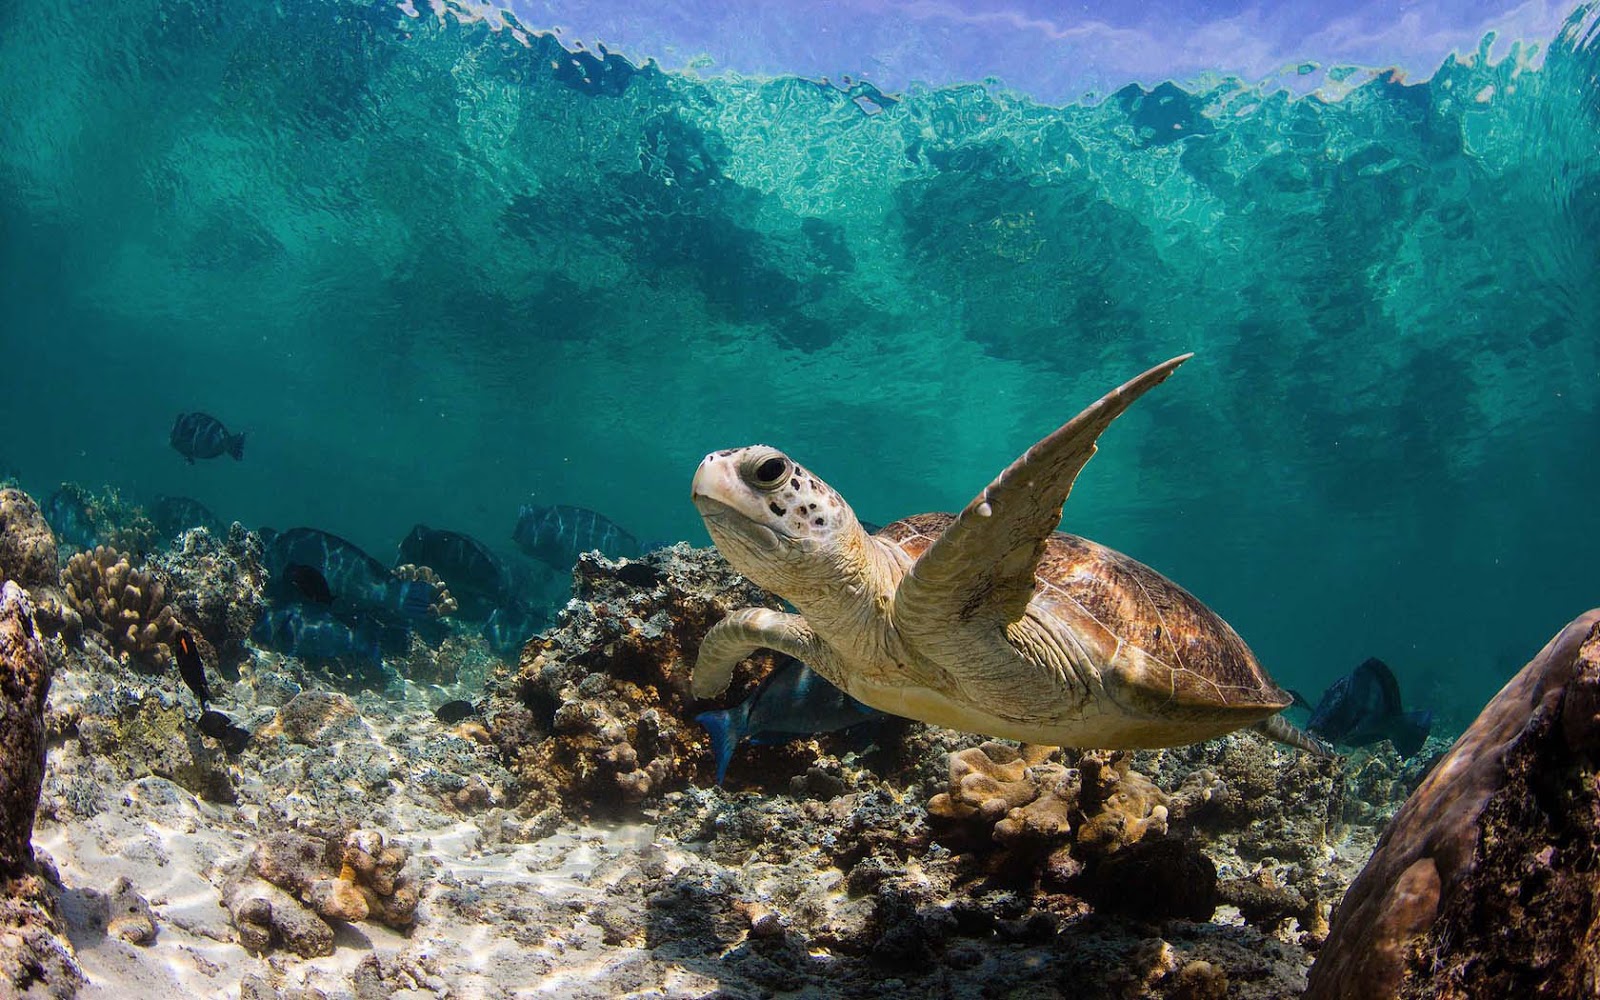 HD Animal Wallpaper With A Turtle Swimming Underwater